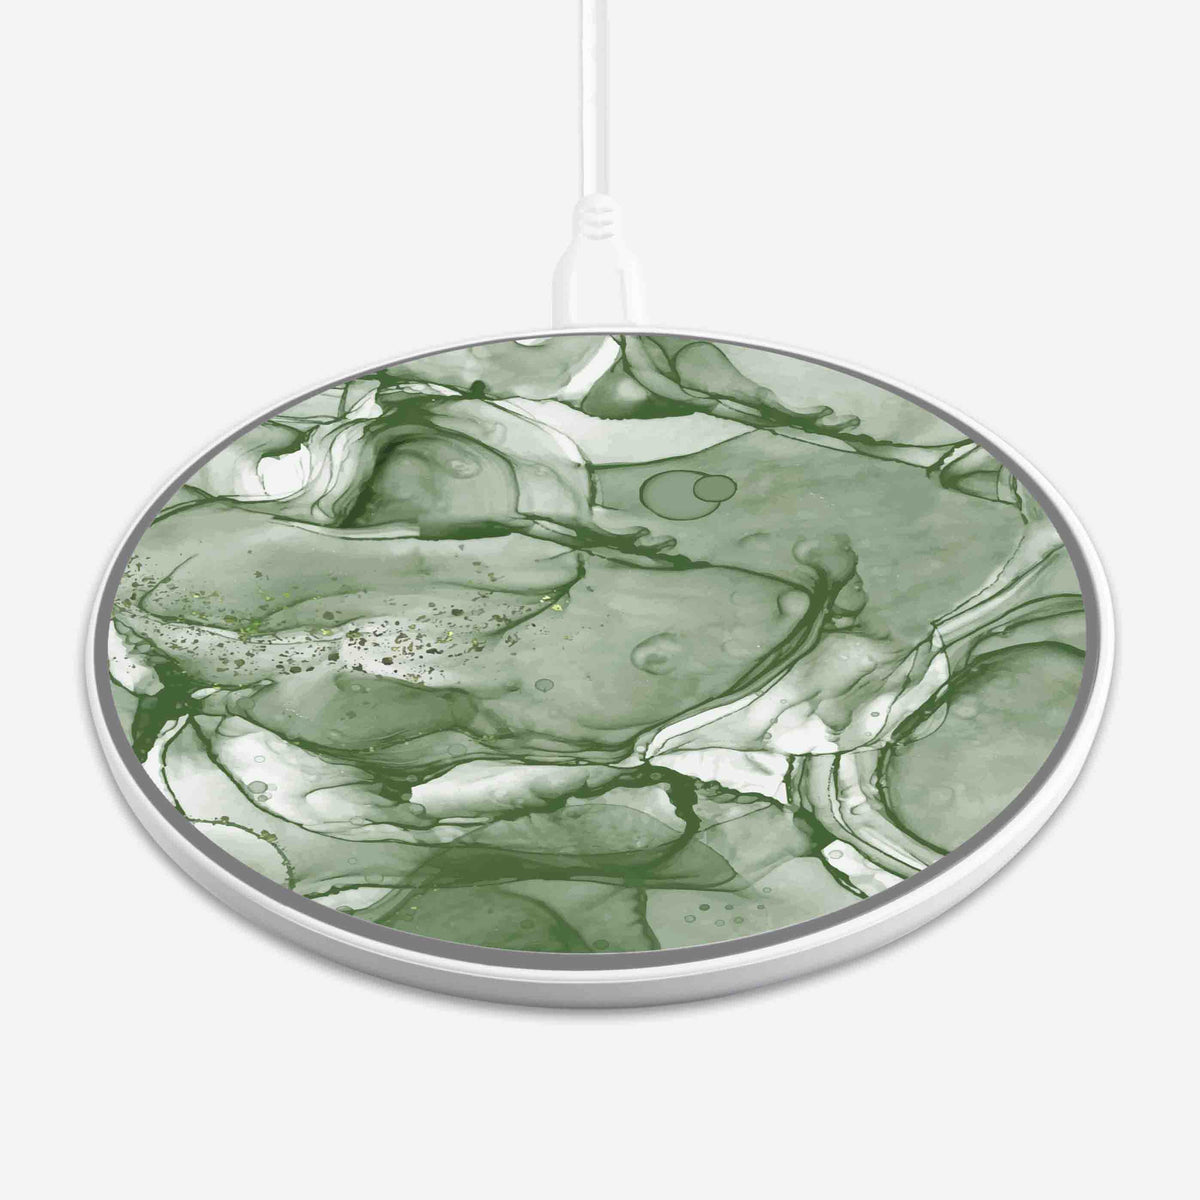 Wireless Charging Pad - Emerald Green Marble Design (Front View)